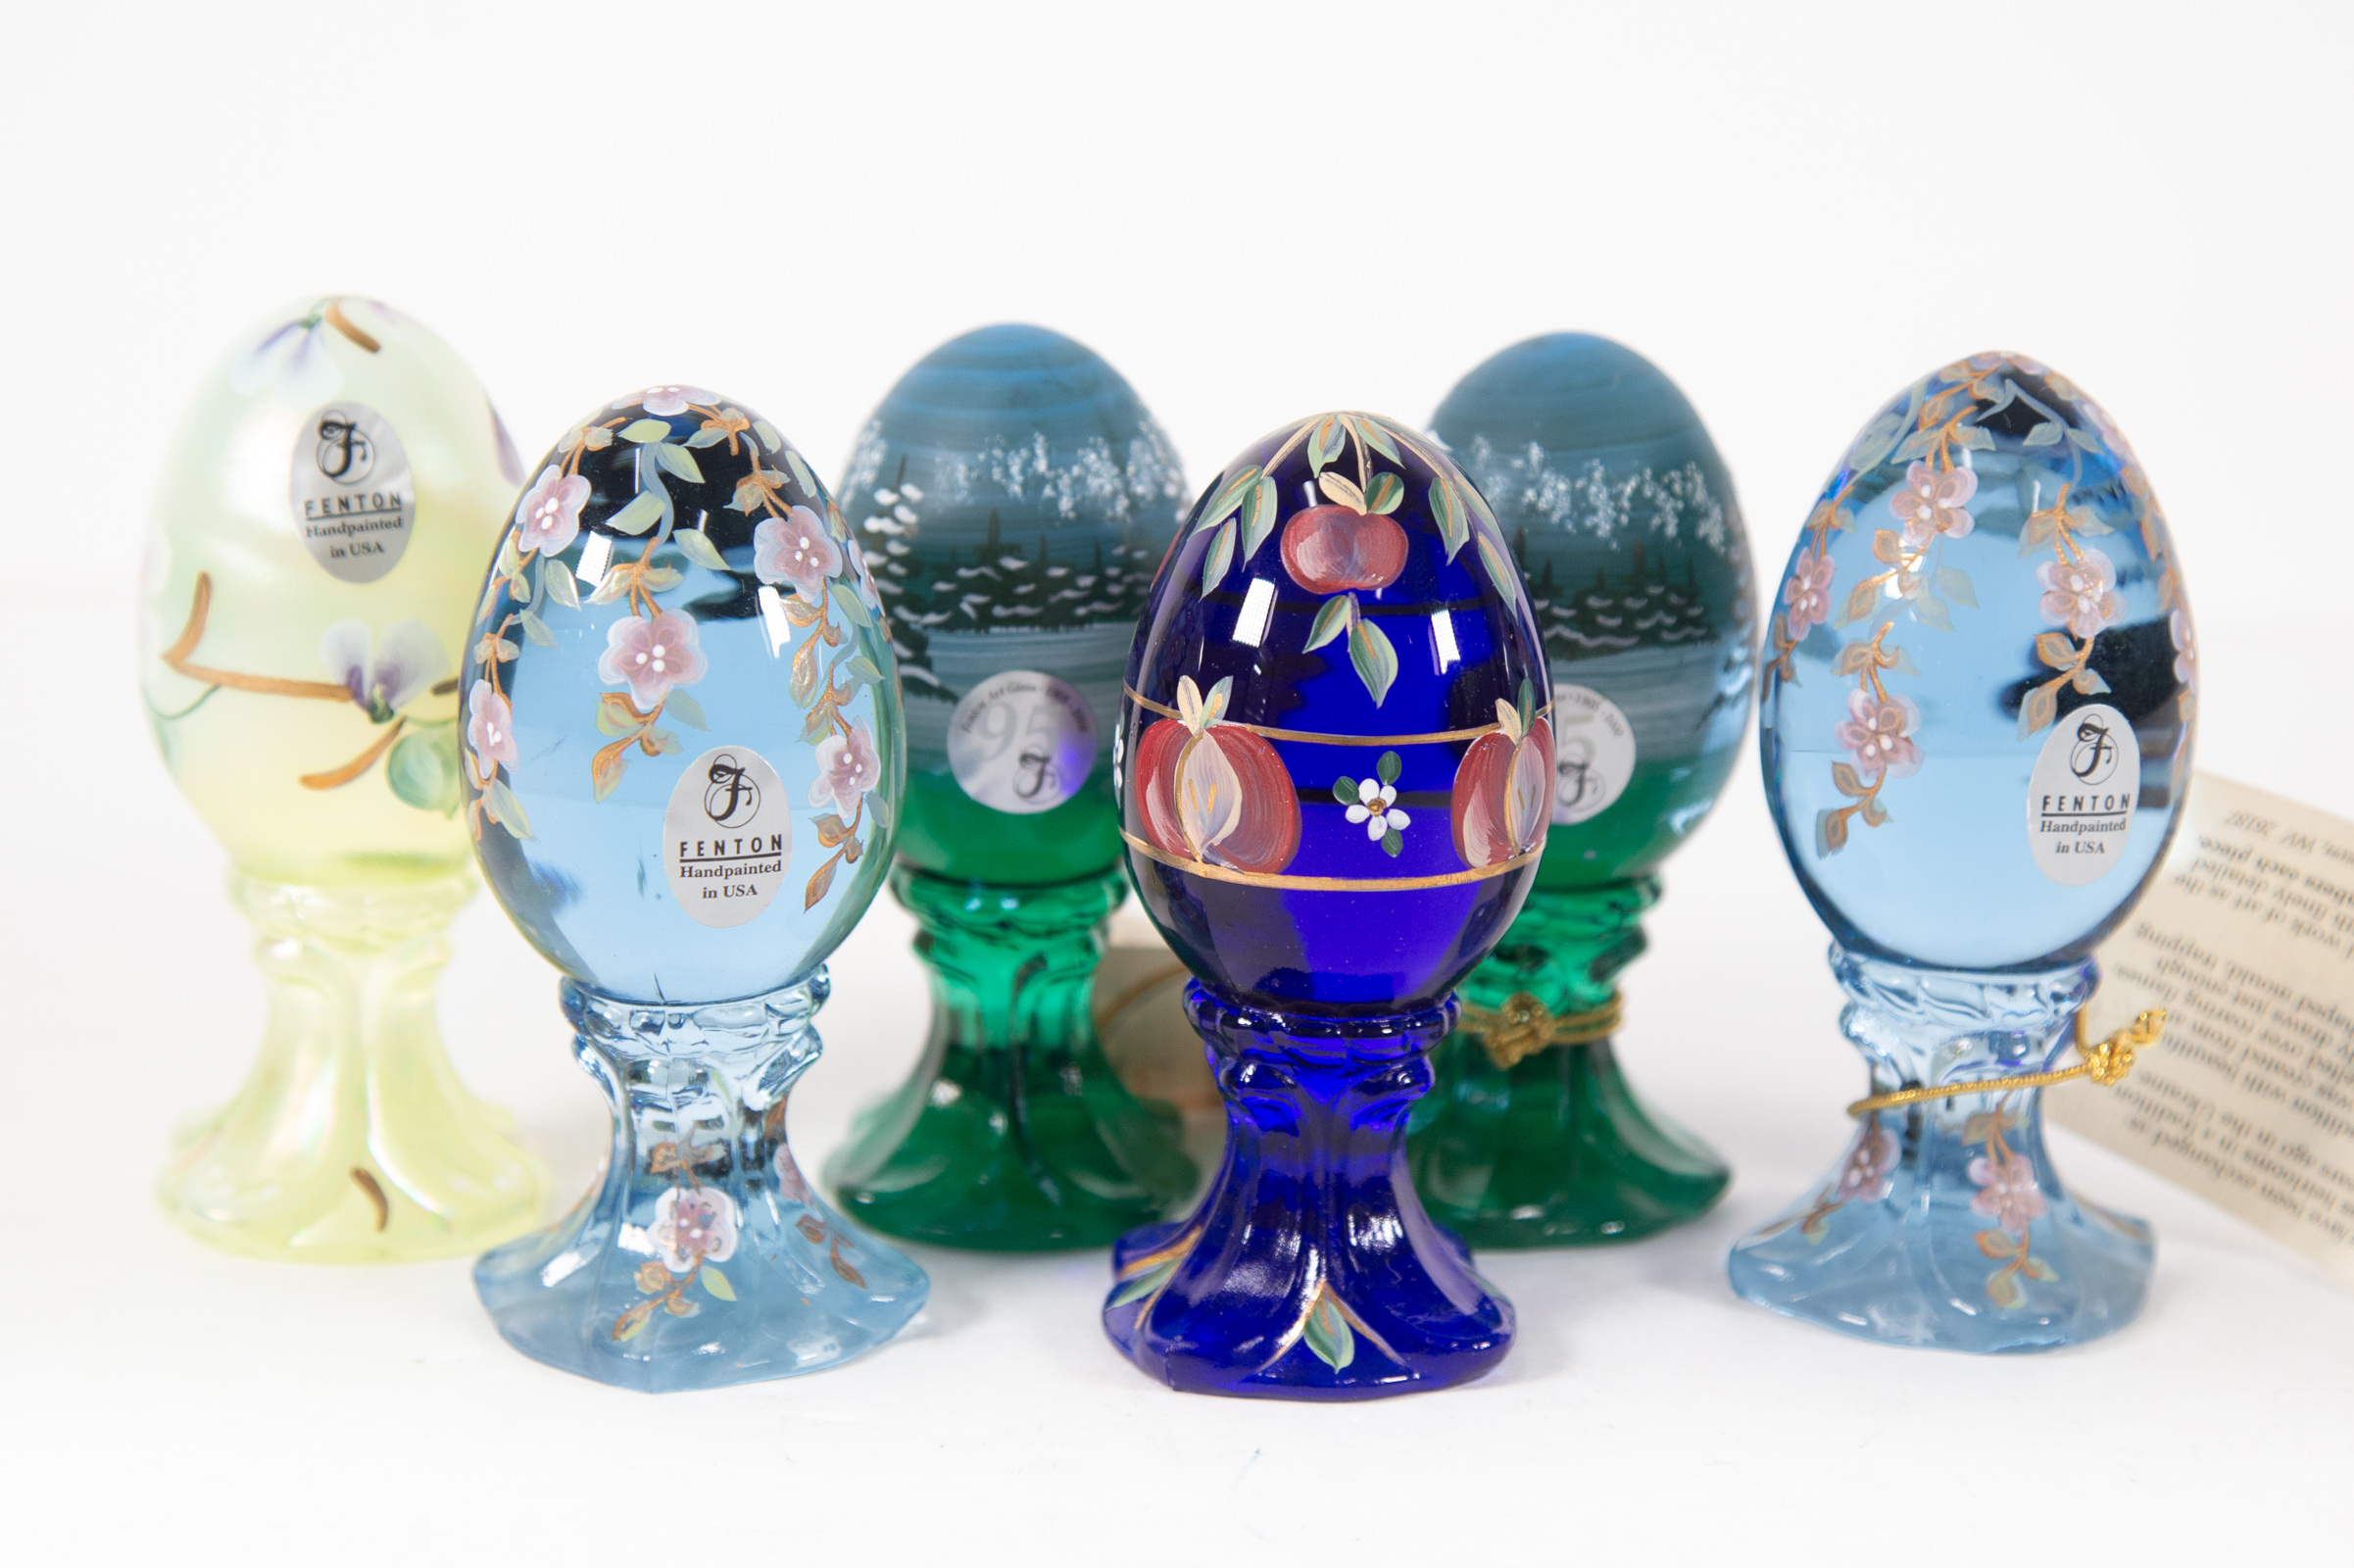 SIX FENTON ARTIST SIGNED EGGS Some limited